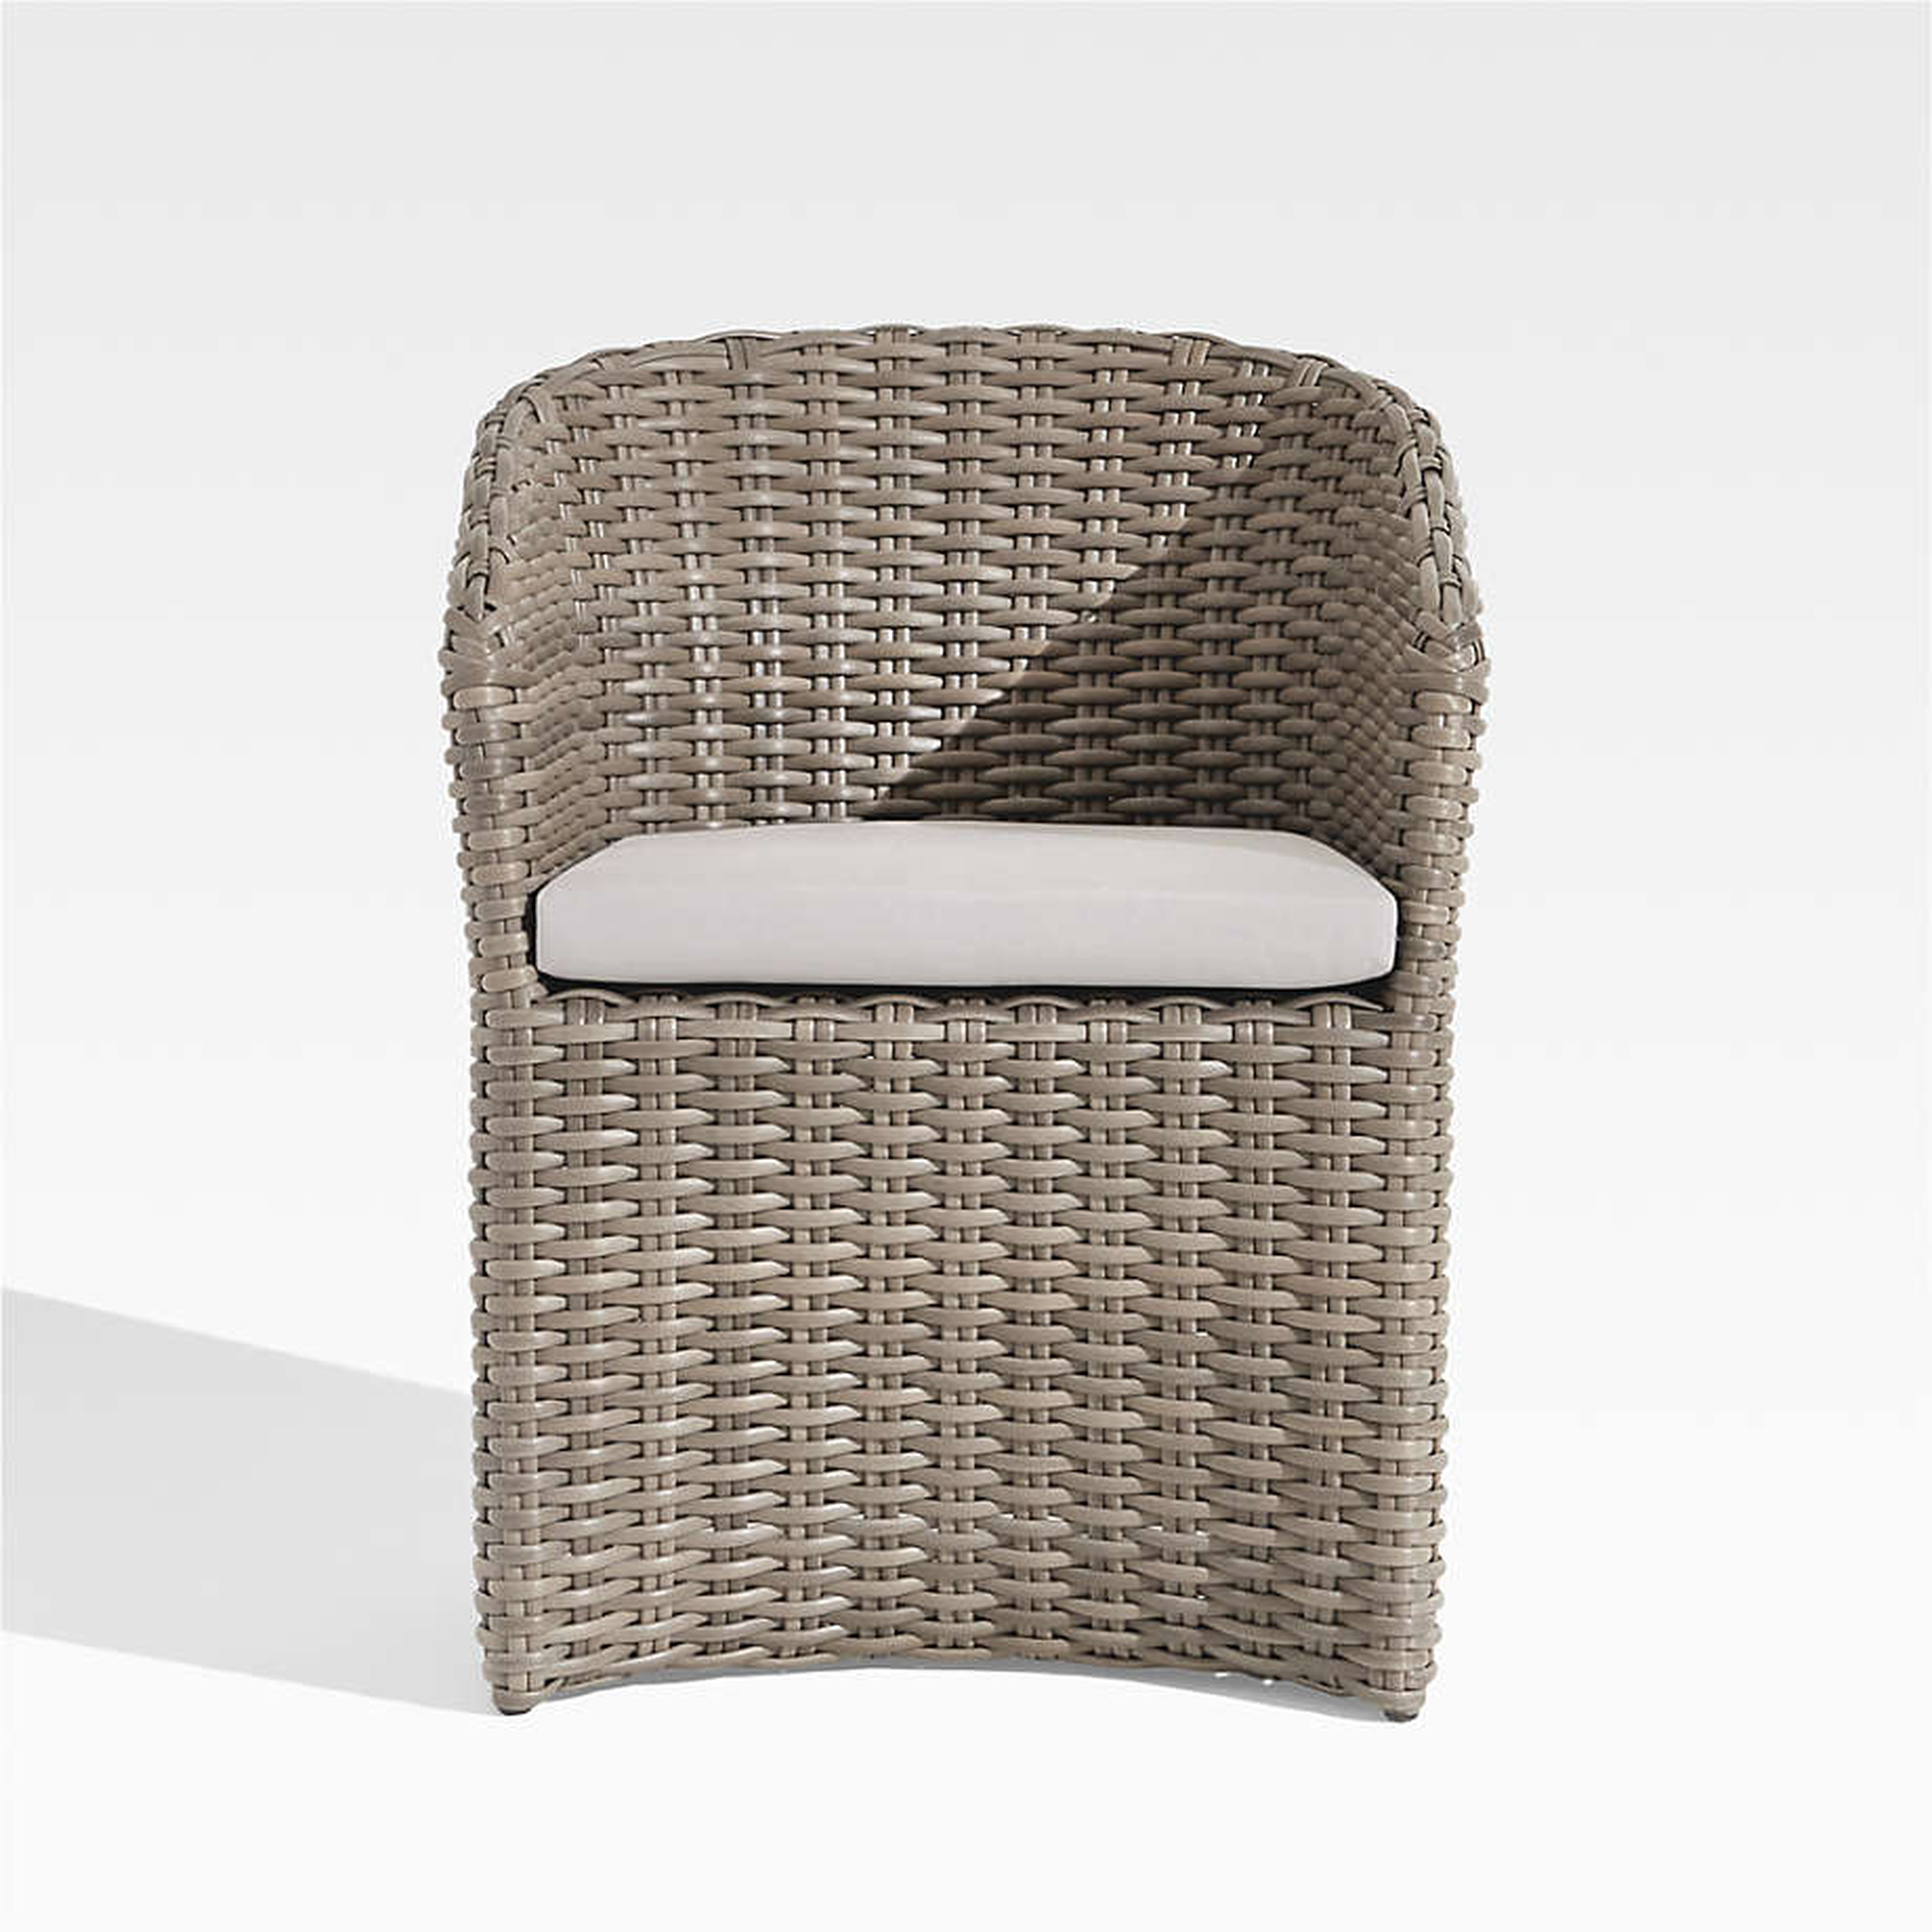 Abaco Resin Wicker Outdoor Dining Chair with White Sand Sunbrella ® Cushion - Crate and Barrel